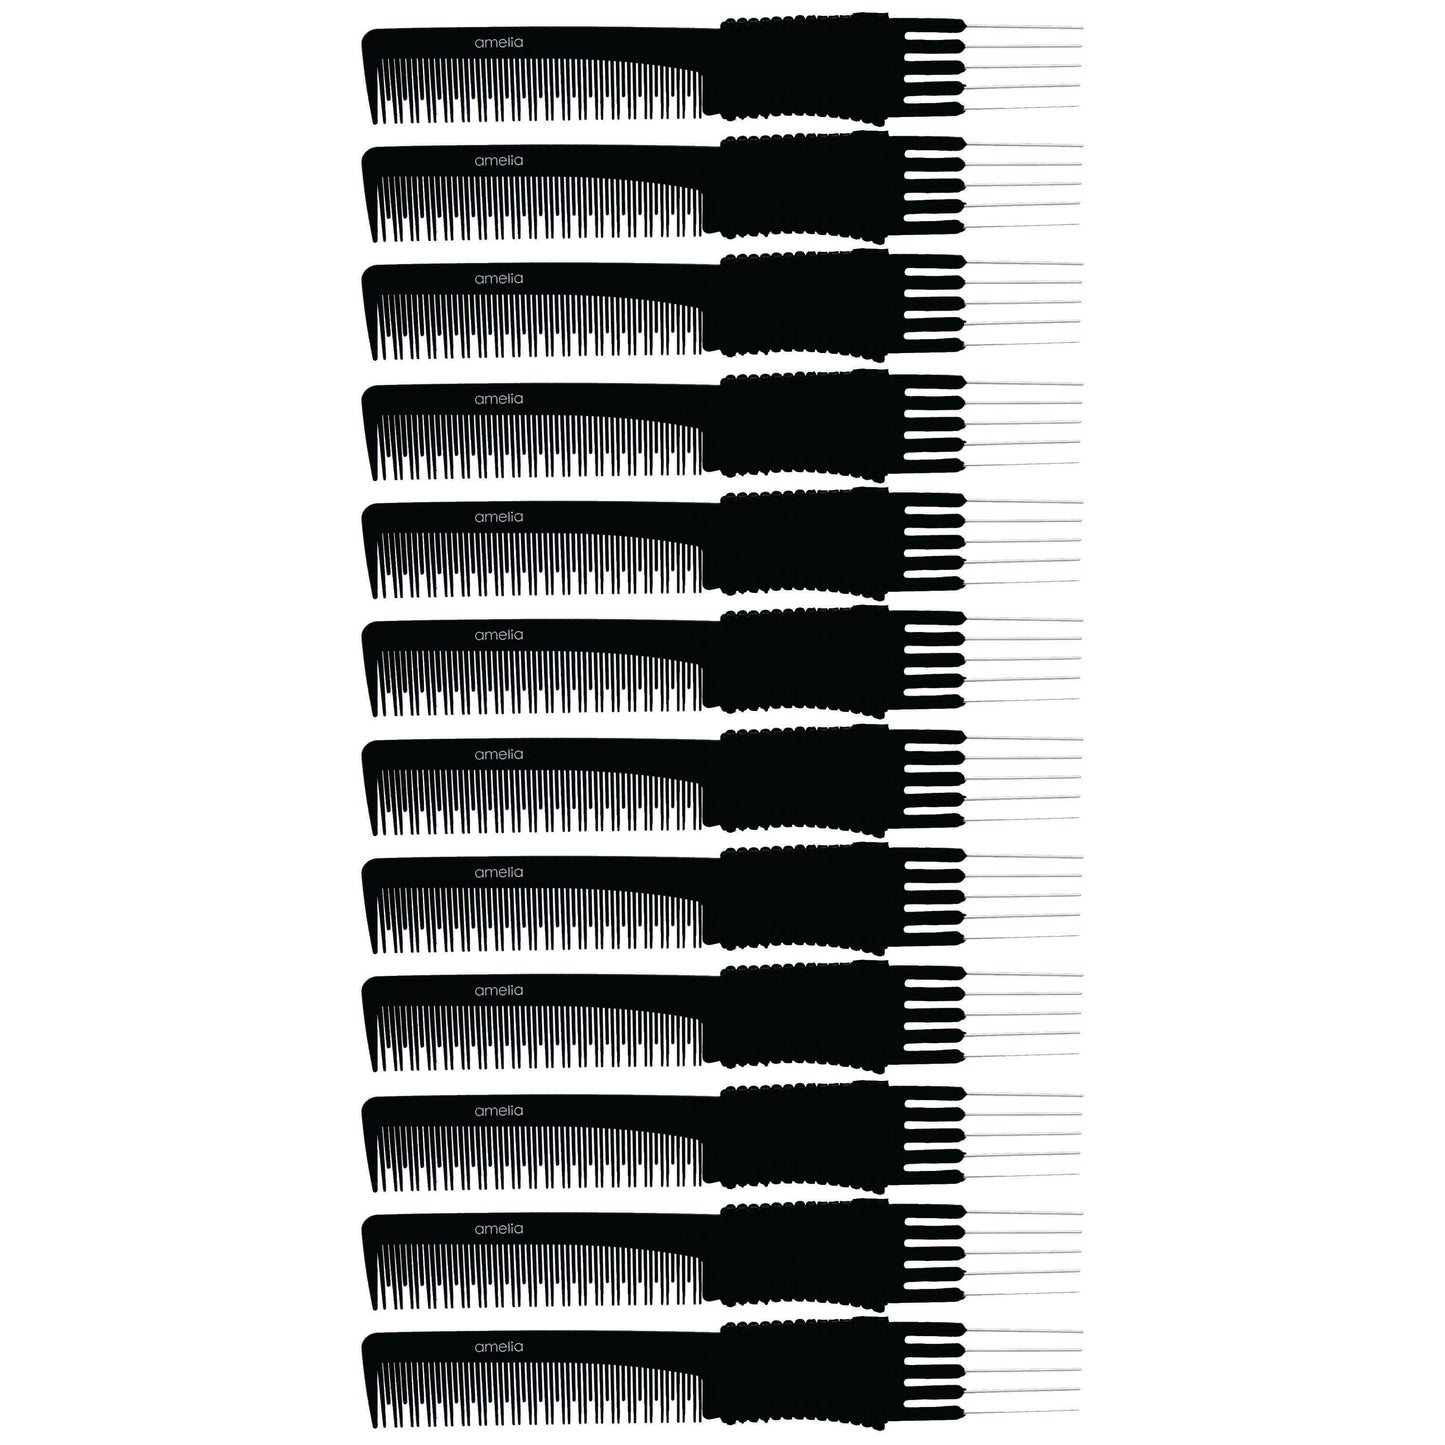 7.75 Stainless Lift/Tease Carbon Comb (12 Pack Bag)